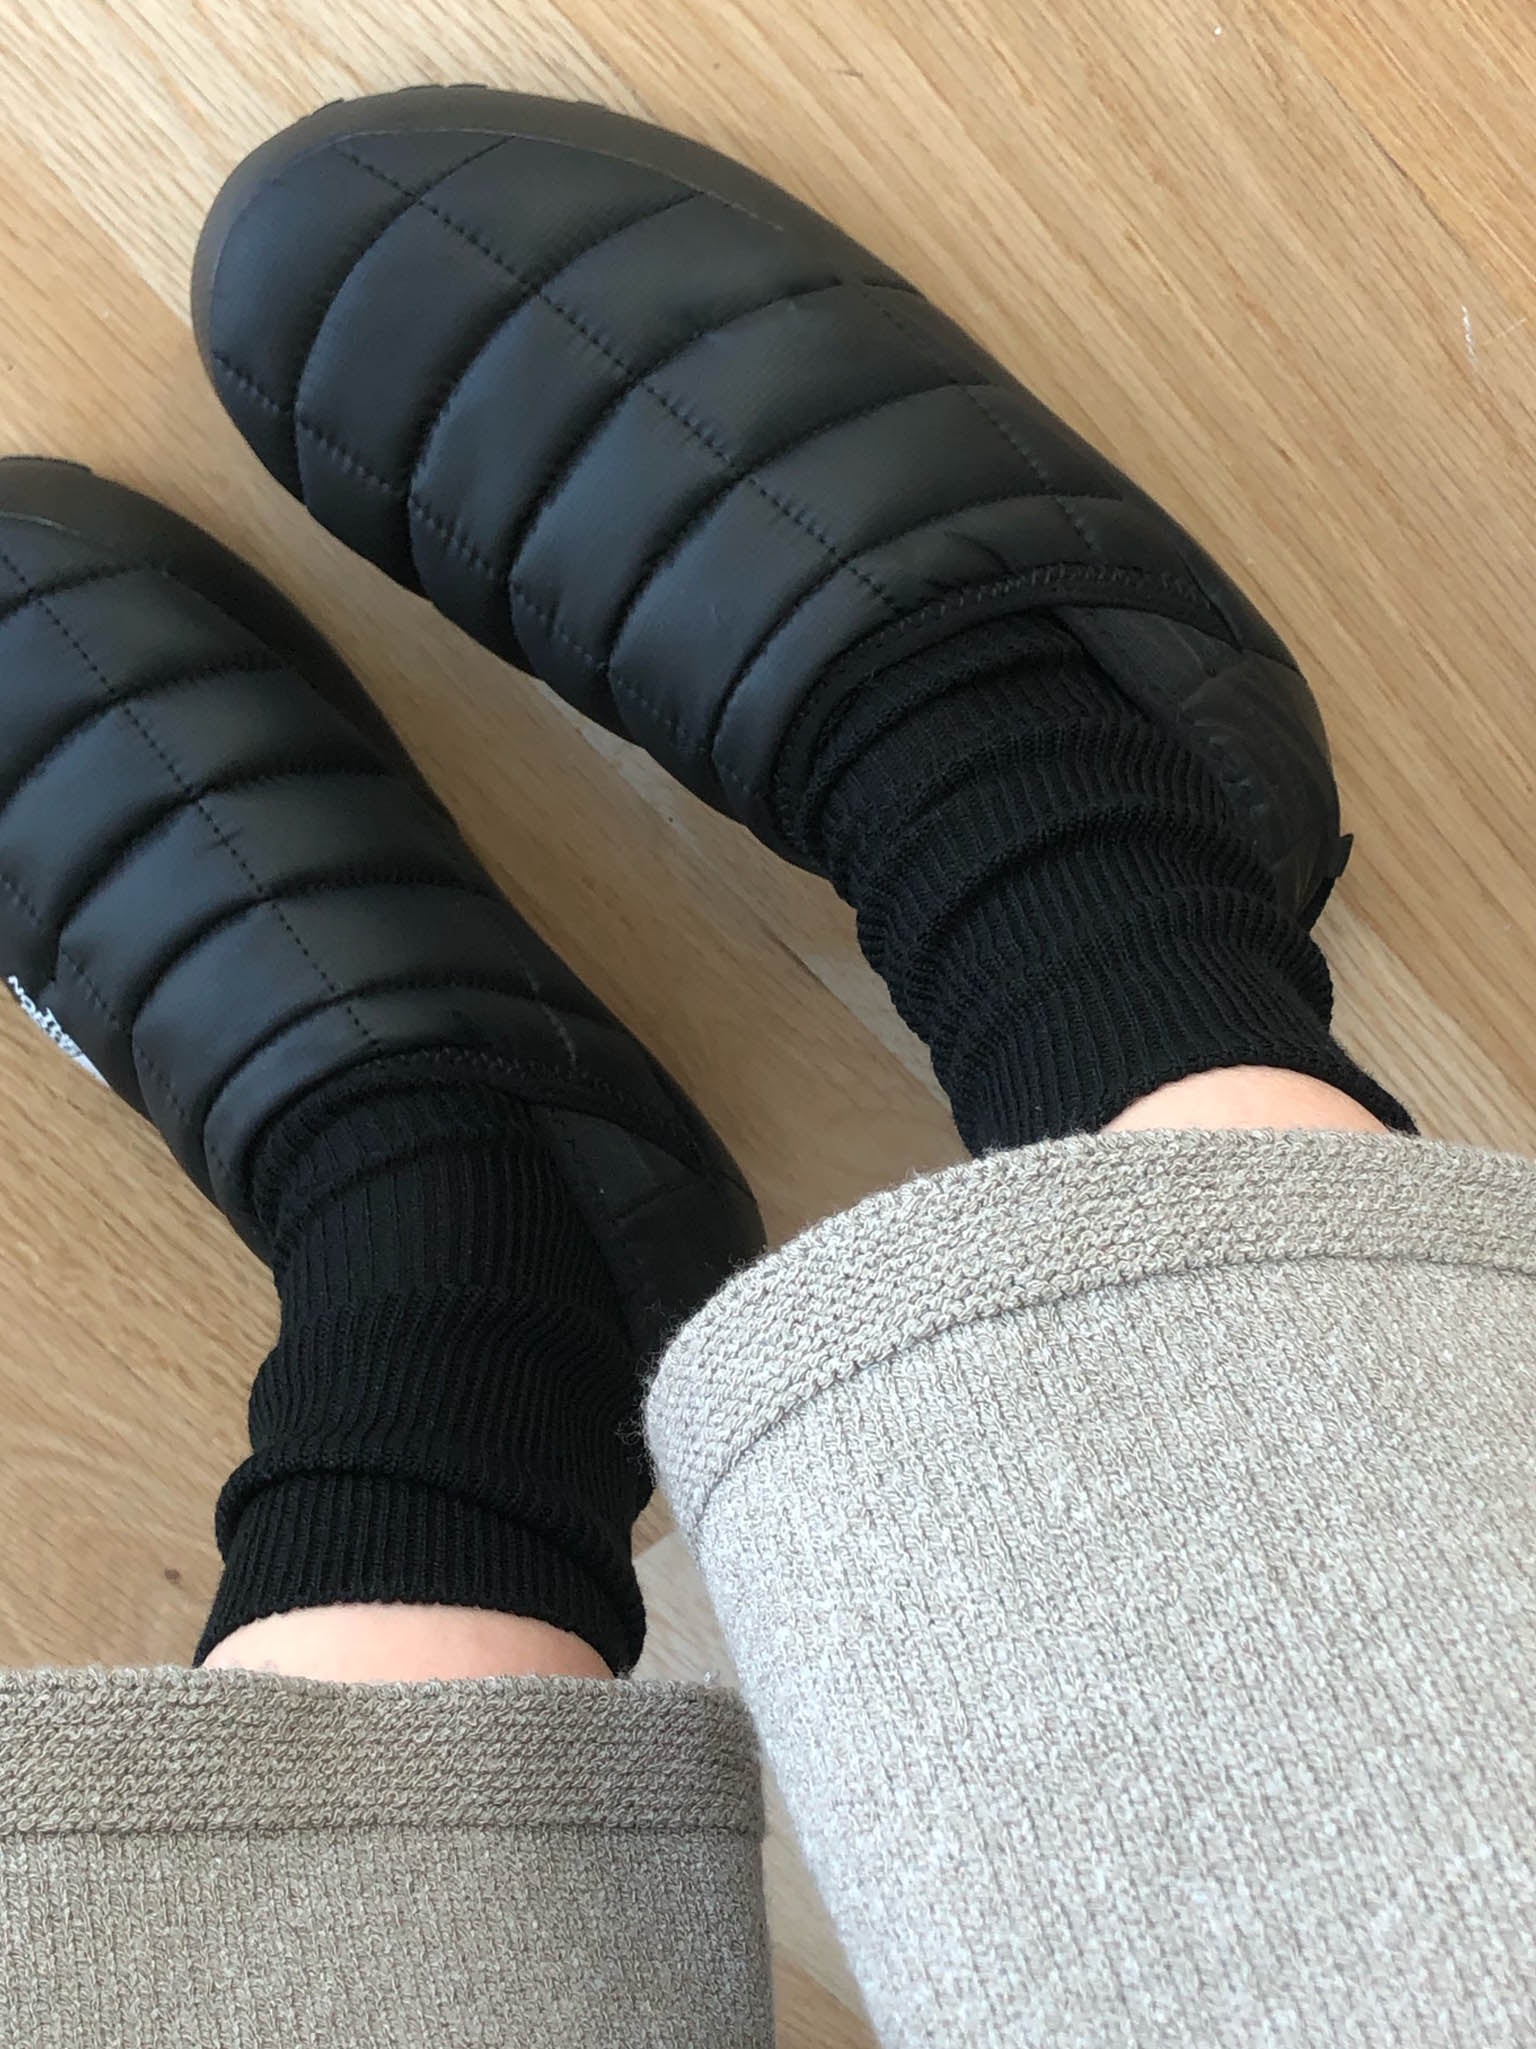 The merino sock in black with black insulated winter slippers